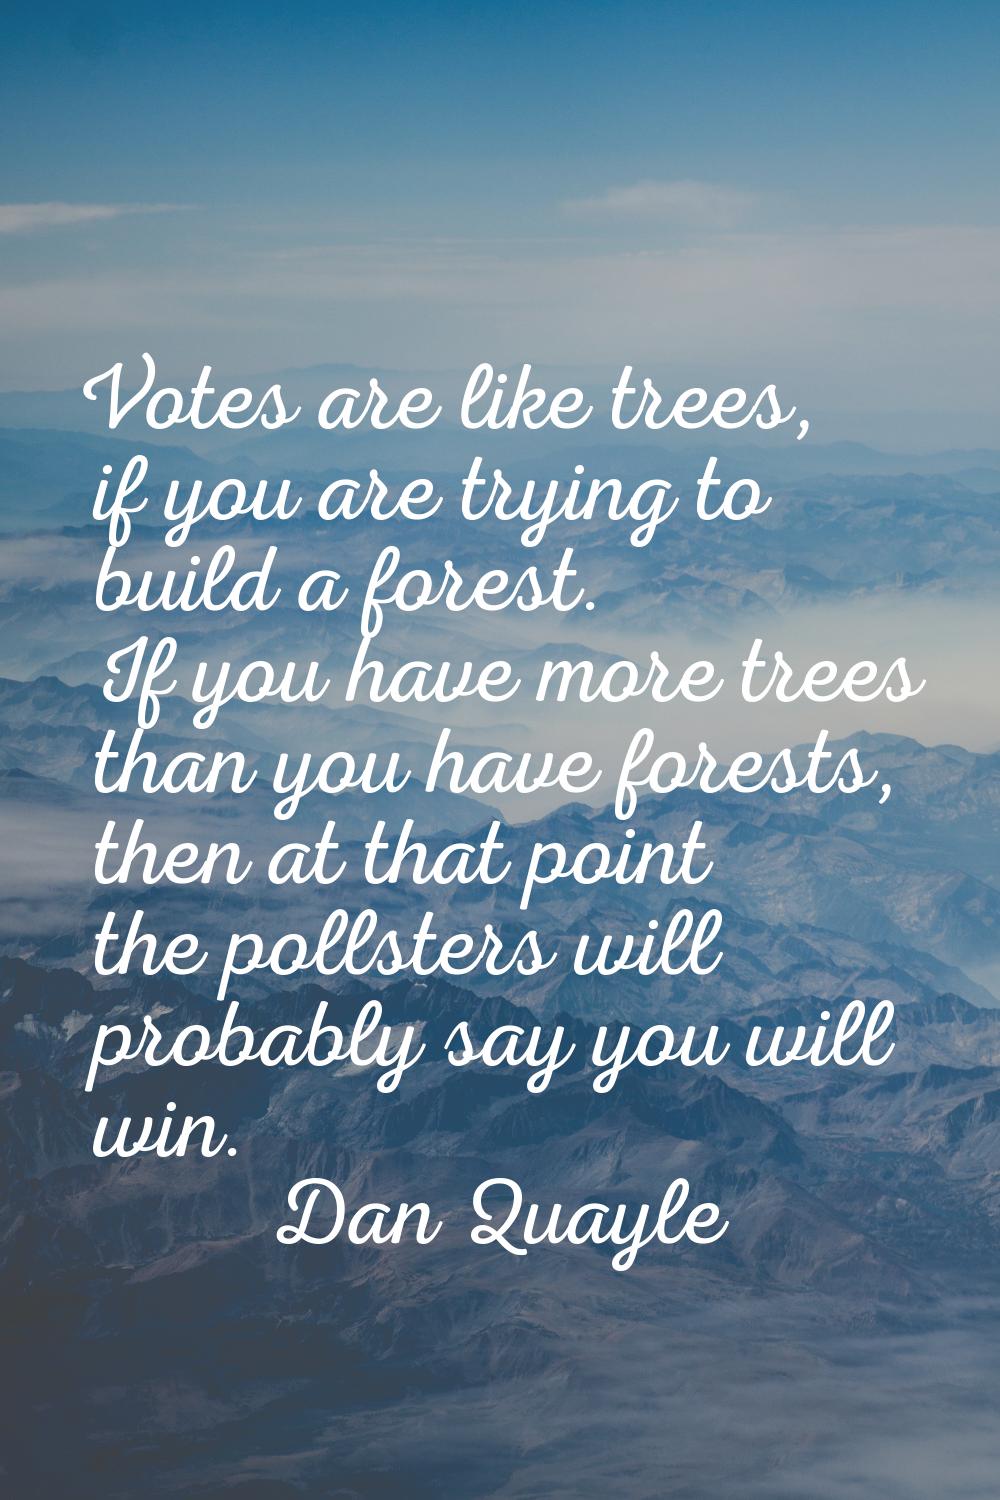 Votes are like trees, if you are trying to build a forest. If you have more trees than you have for